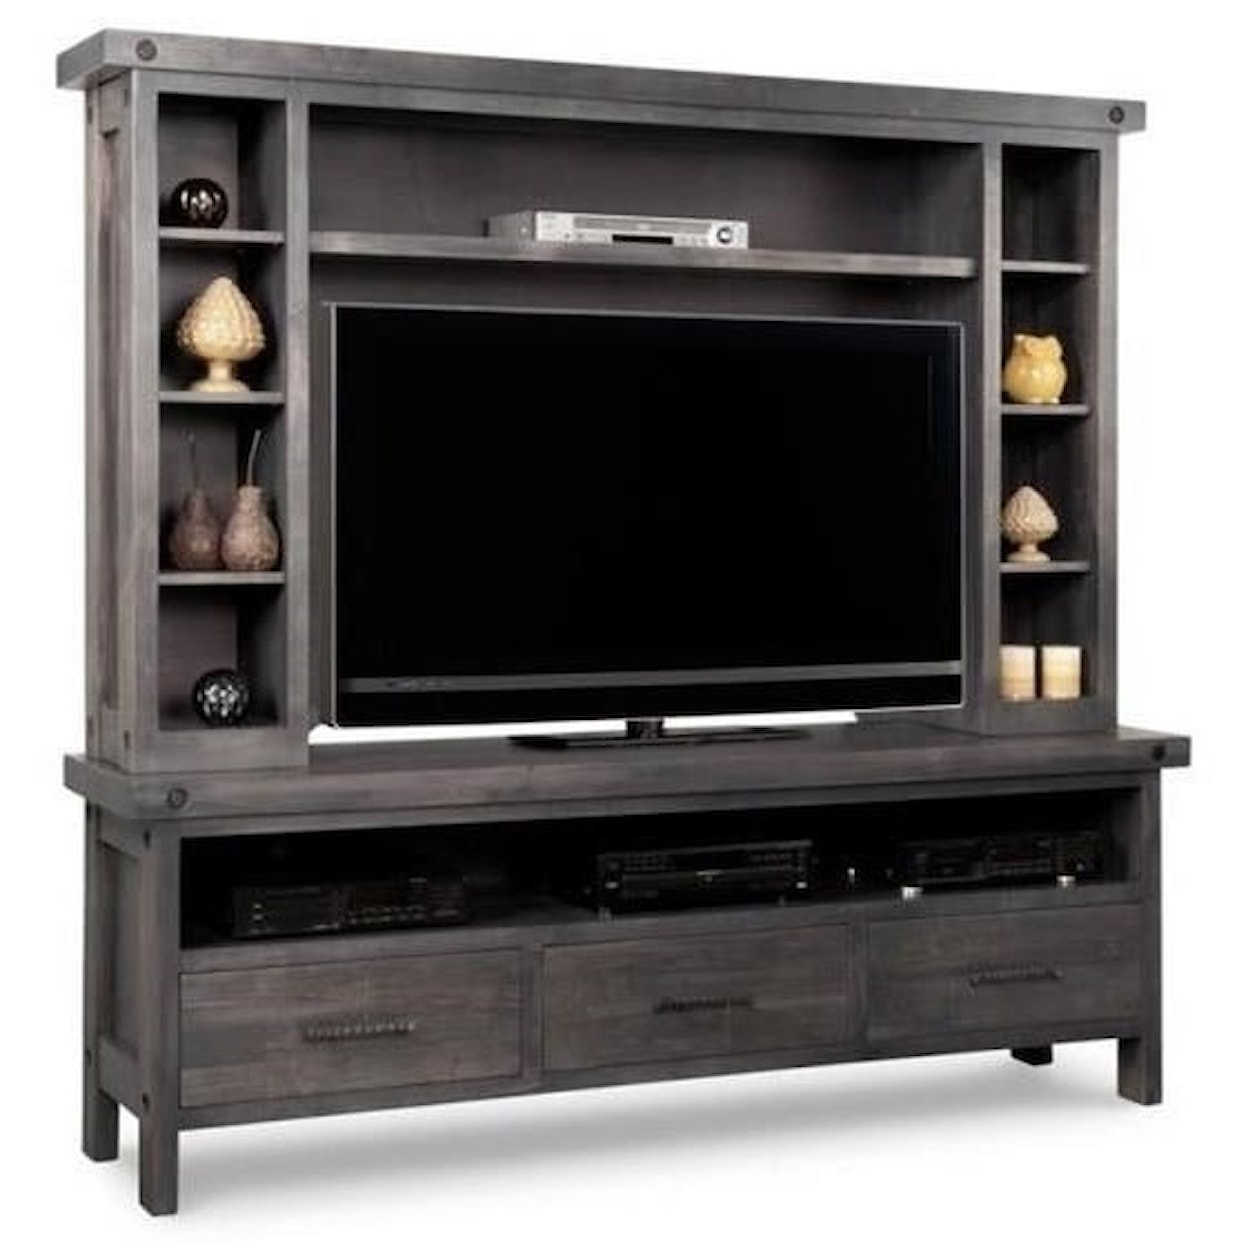 Handstone Rafters HDTV Unit